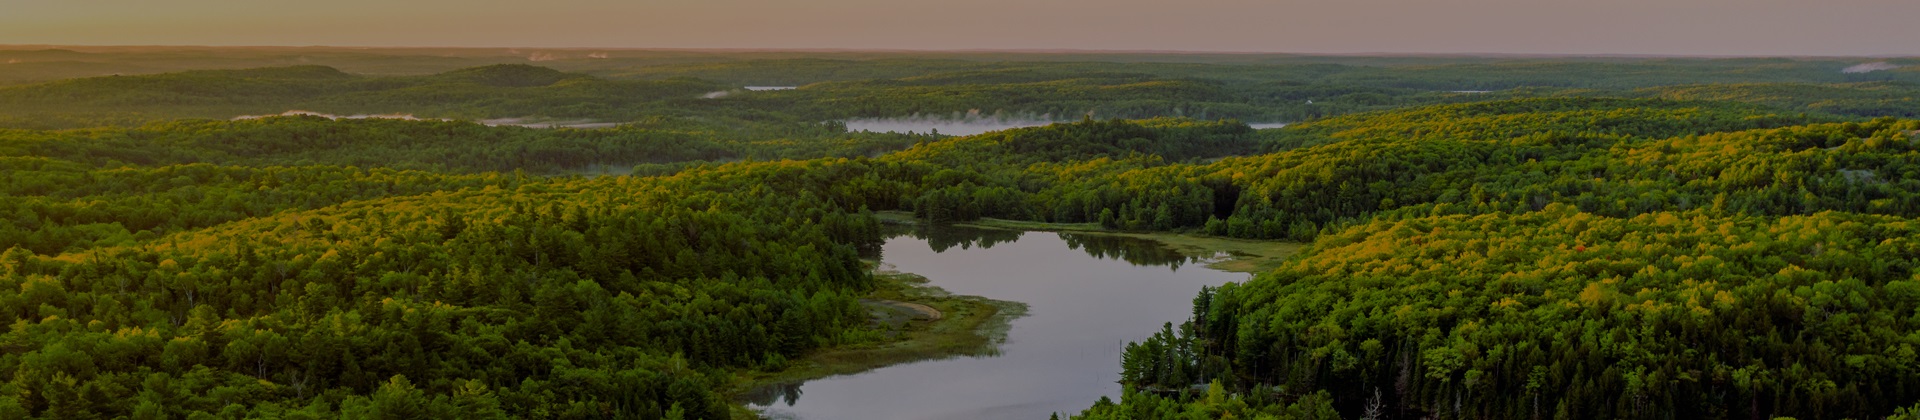 An aerial view of a dense, green forest interspersed with small lakes under a calm sky at dusk.